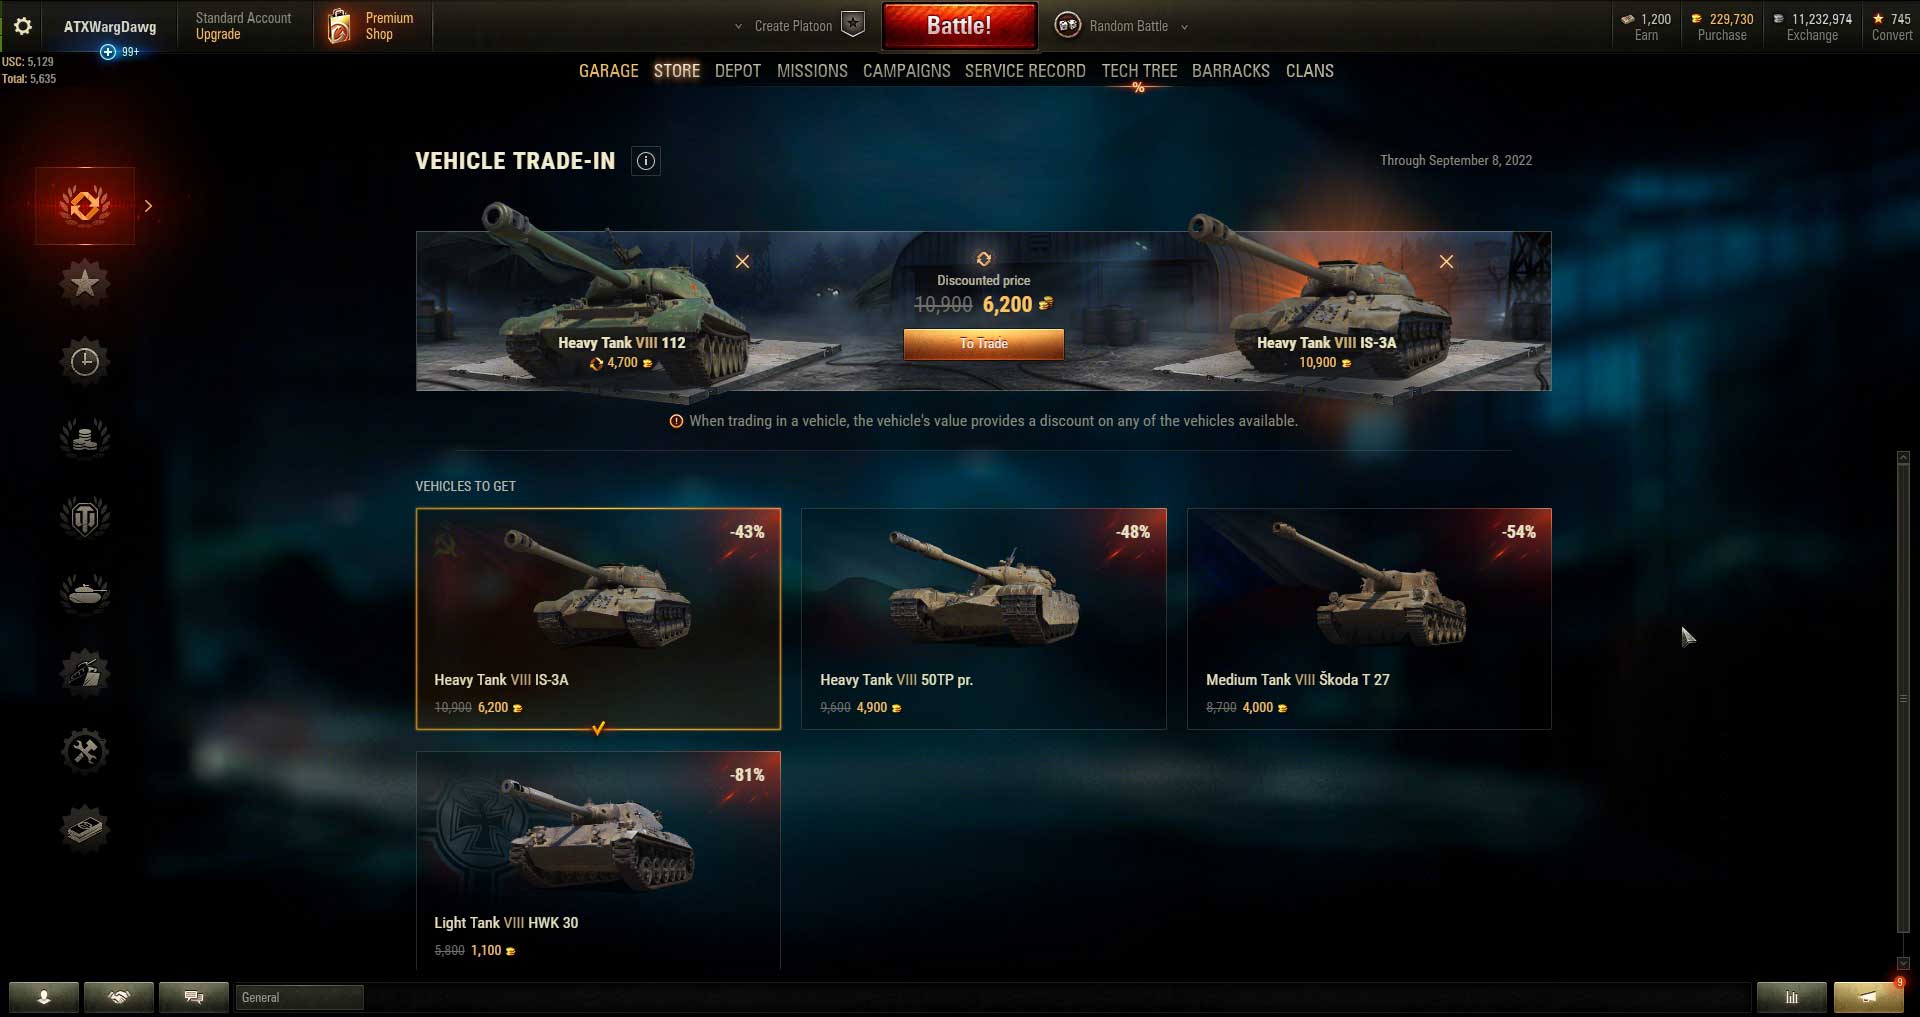 Trading - 2 battle.net Accounts and 1 world of tanks account - EpicNPC